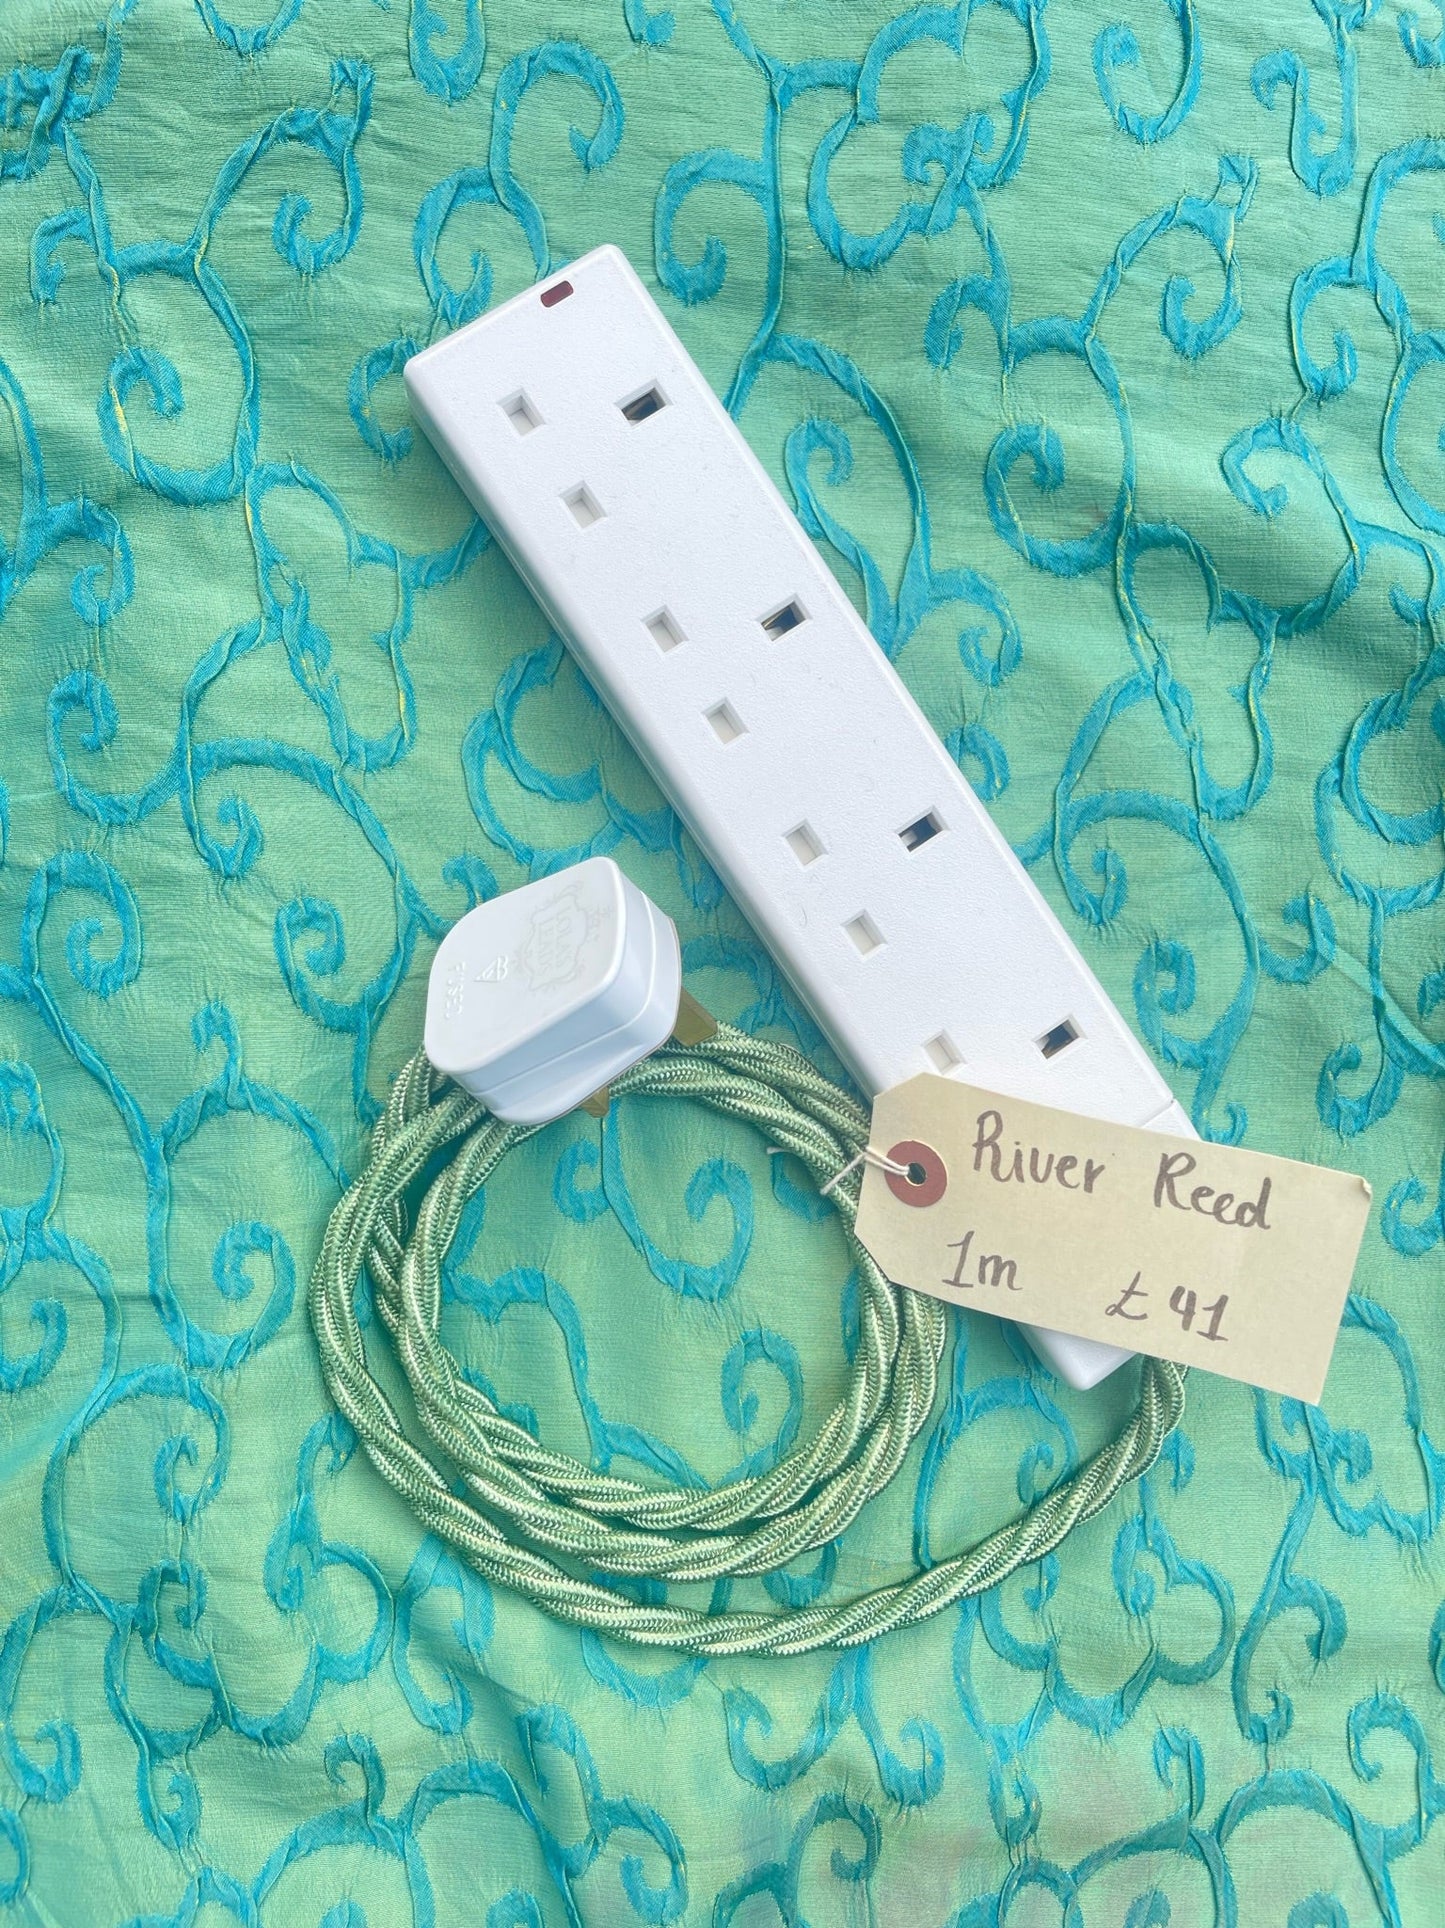 Lola's Leads – River Reed + White 1m | 4 Gang